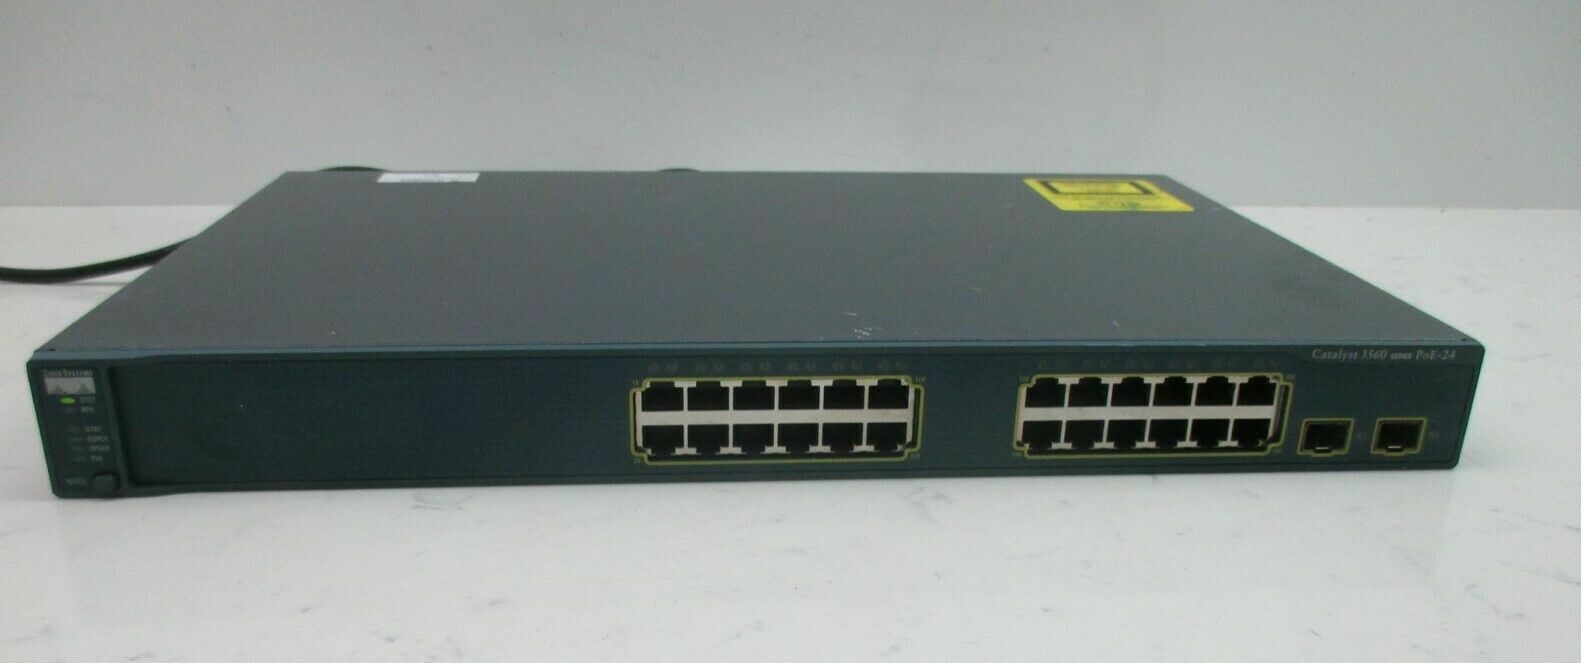 Cisco Catalyst PoE-24 Port Ethernet Switch 3560 Series WS-C3560-24PS-S V6